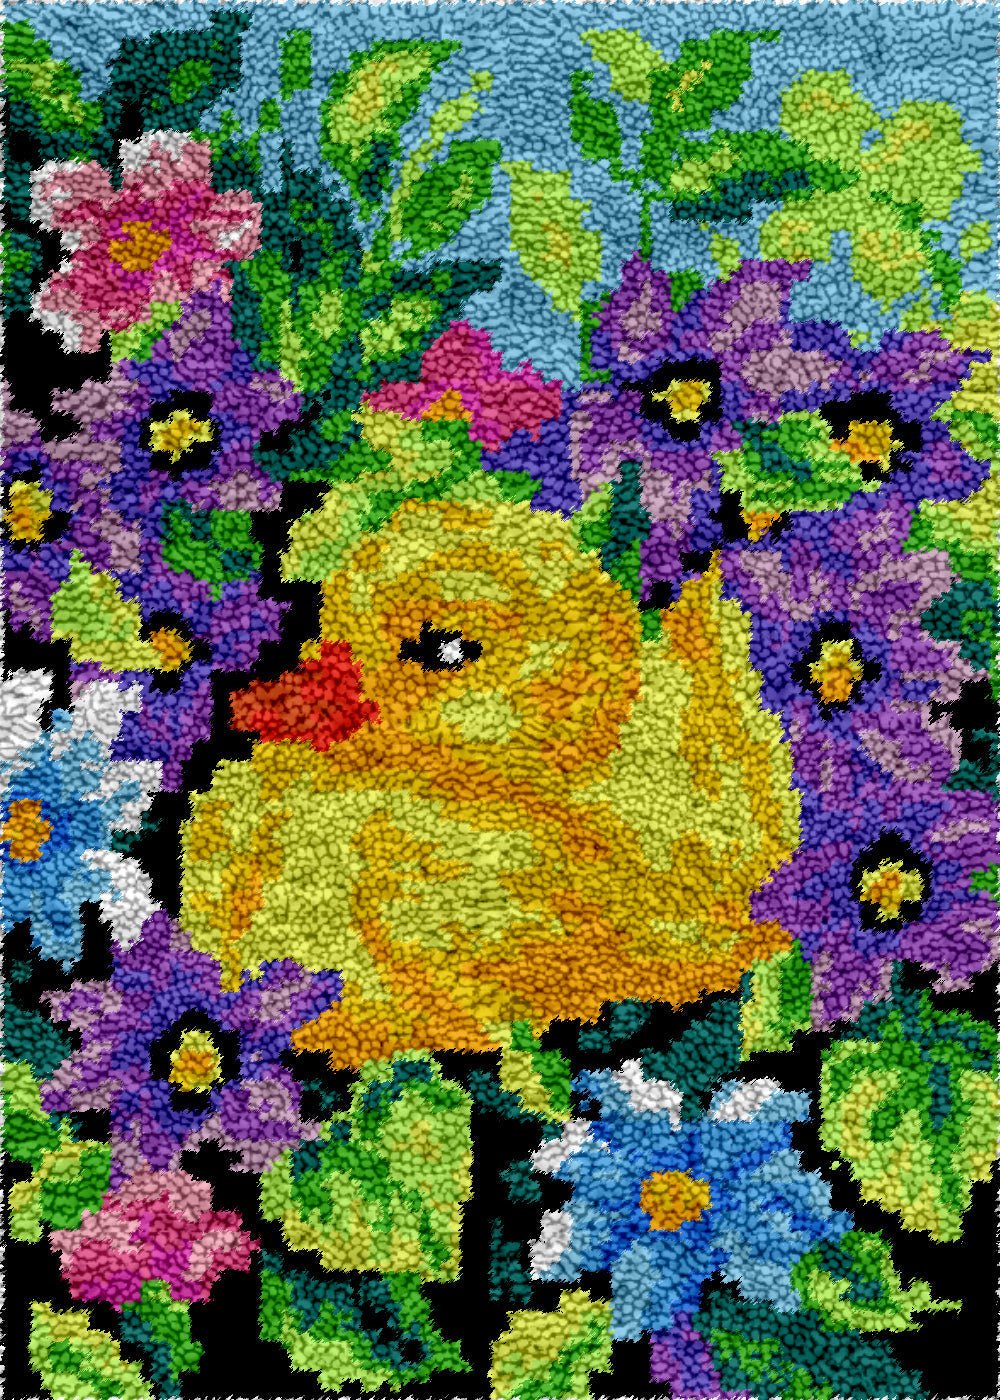 Ducky and Petunias - Latch Hook Rug Kit - Latch Hook Crafts